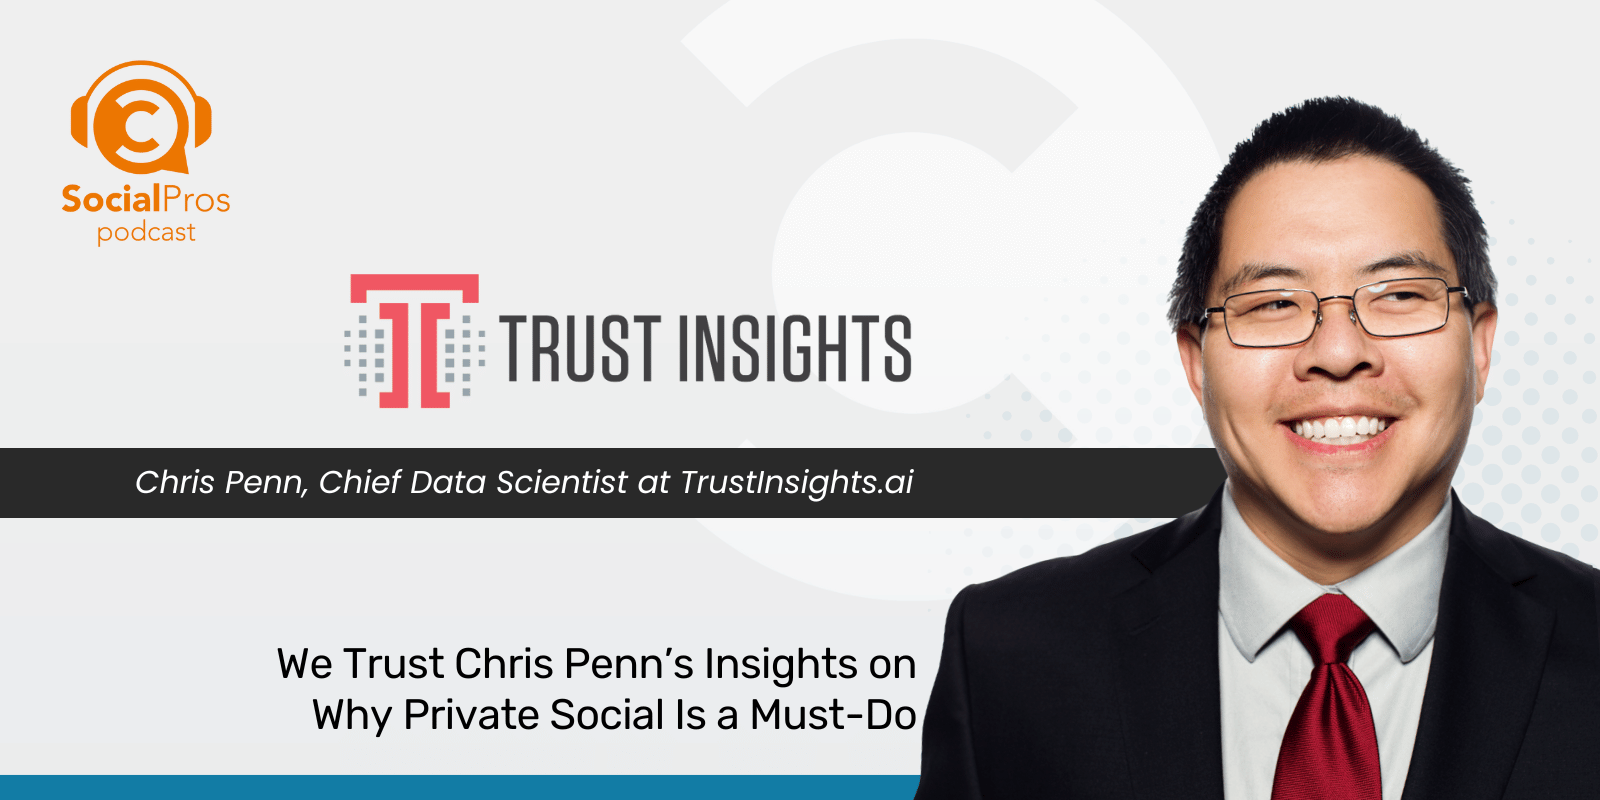 We Trust Chris Penn’s Insights on Why Private Social Is a Must-Do